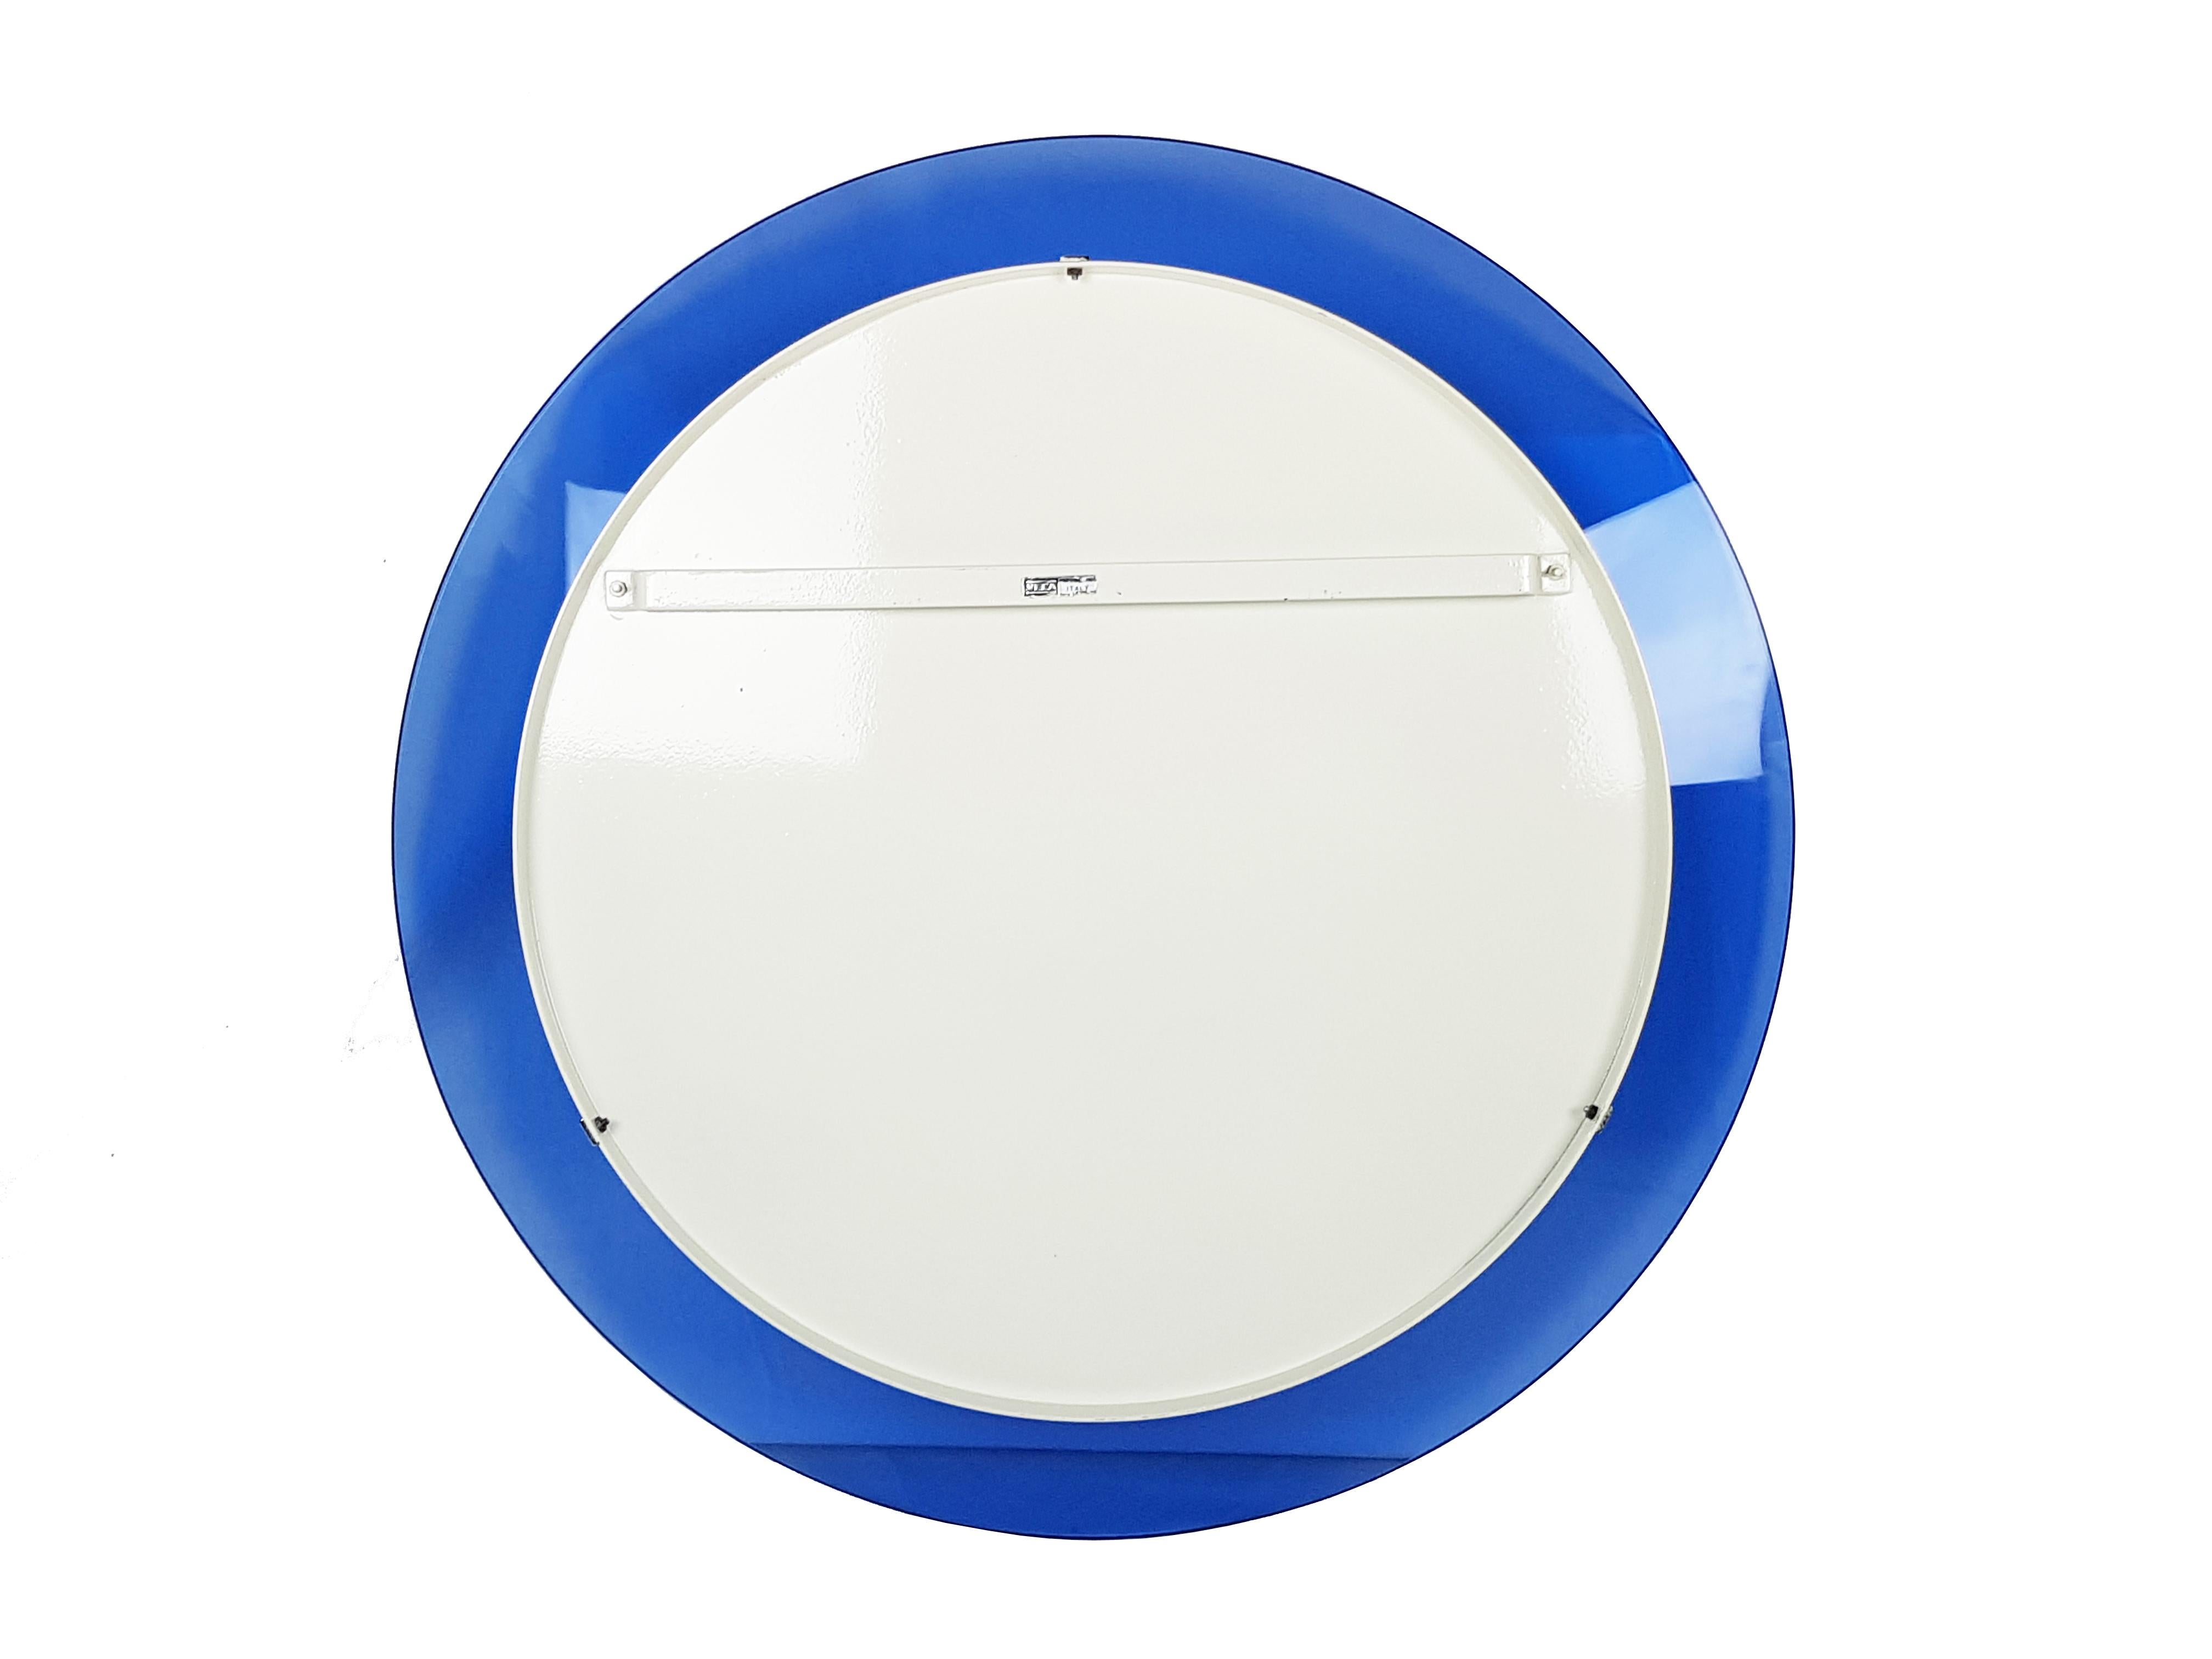 Blue Convex Glass and Chrome-Plated Metal Round Mirror by Veca For Sale 3